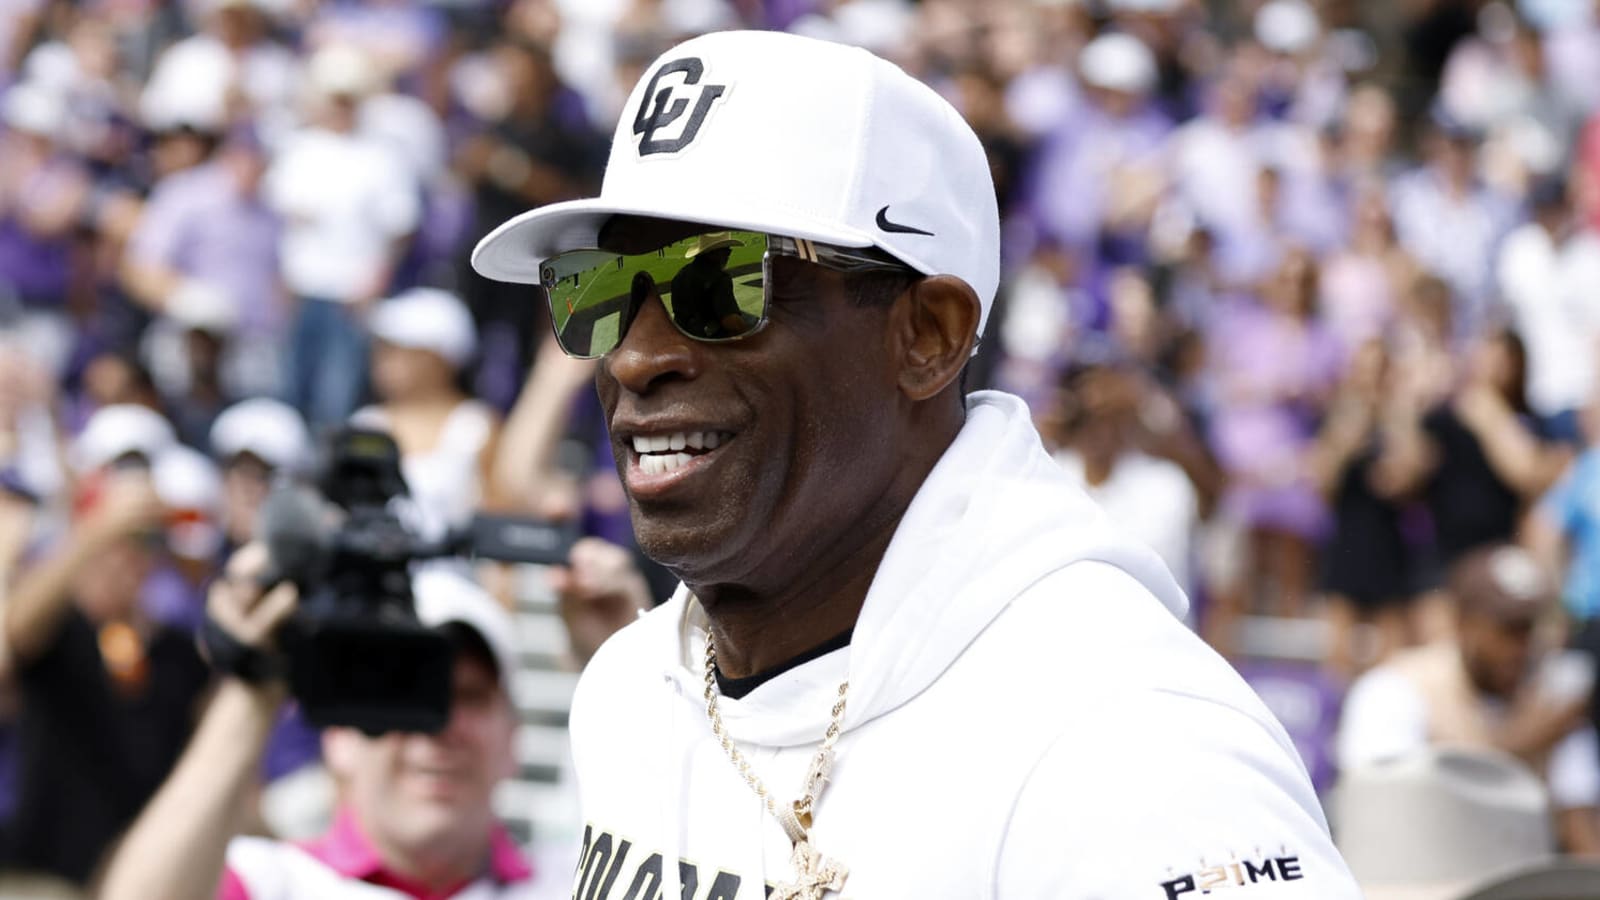 Deion Sanders was first drafted by Royals